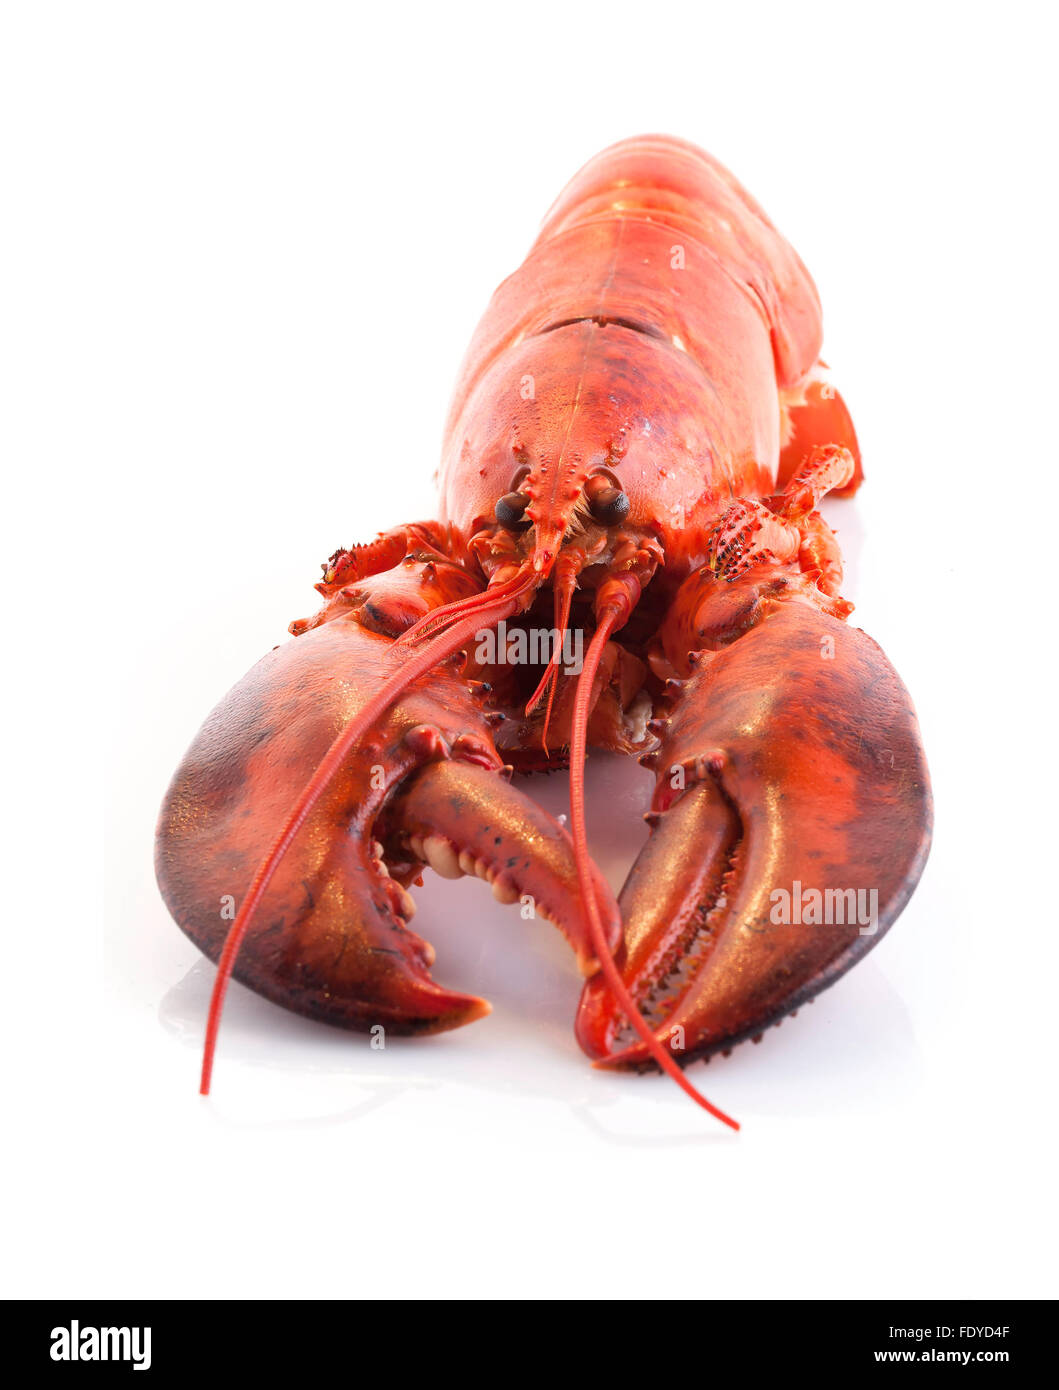 Lobster on White Background Stock Photo